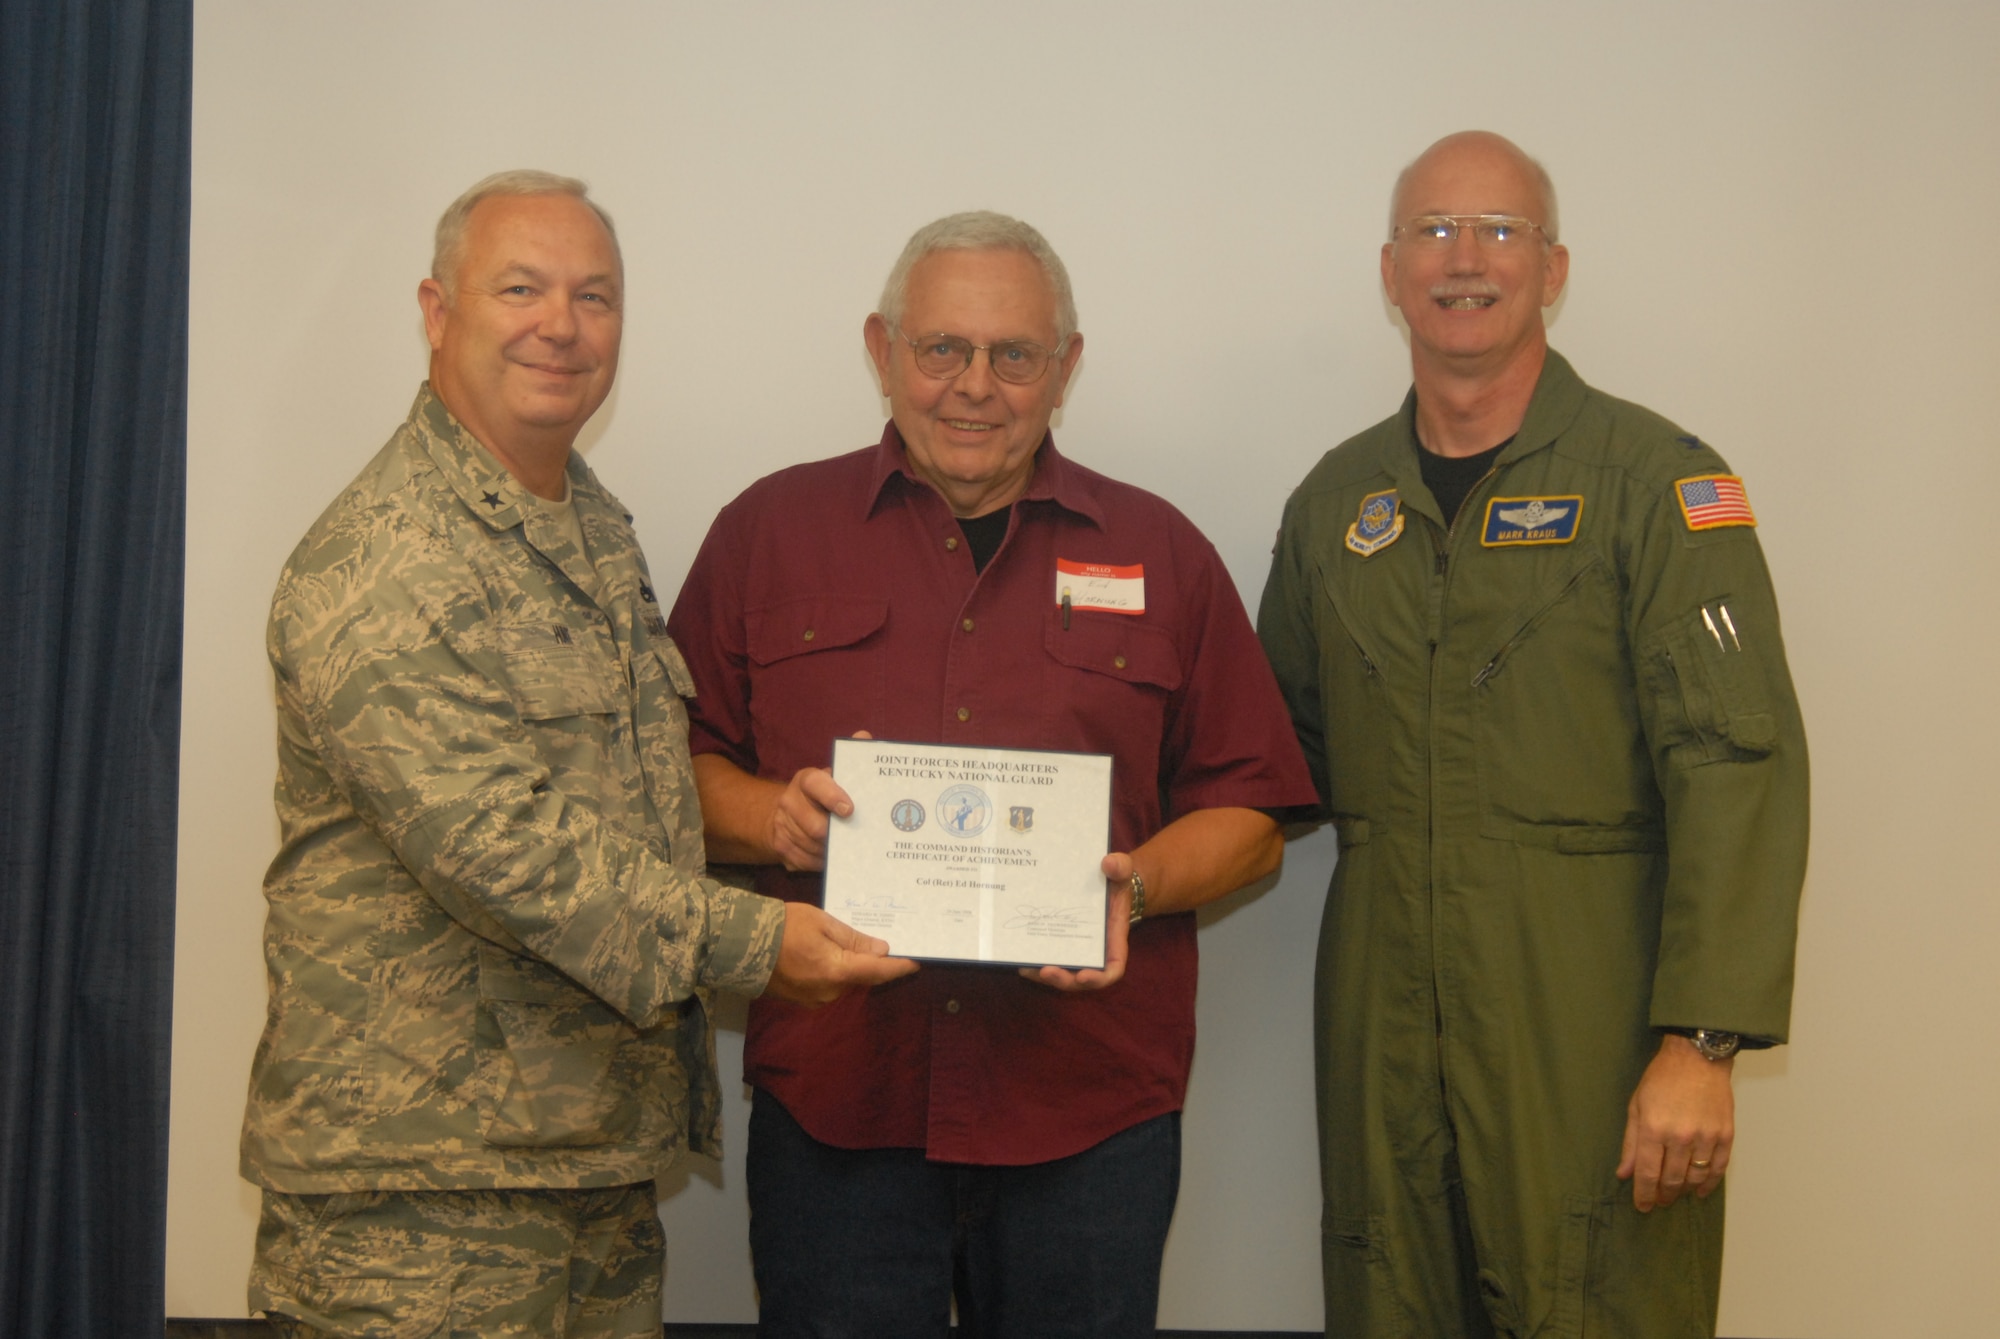 Col. (ret) Ed Hornung receives the Historian’s Certificate of Achievement, presented by Brig. Gen. Howard P. Hunt, III, Kentucky Air National Guard Assistant Adjutant General, and Col. Mark R. Kraus, 123rd Airlift Wing Commander - photo by Tech. Sgt. Philip S. Speck